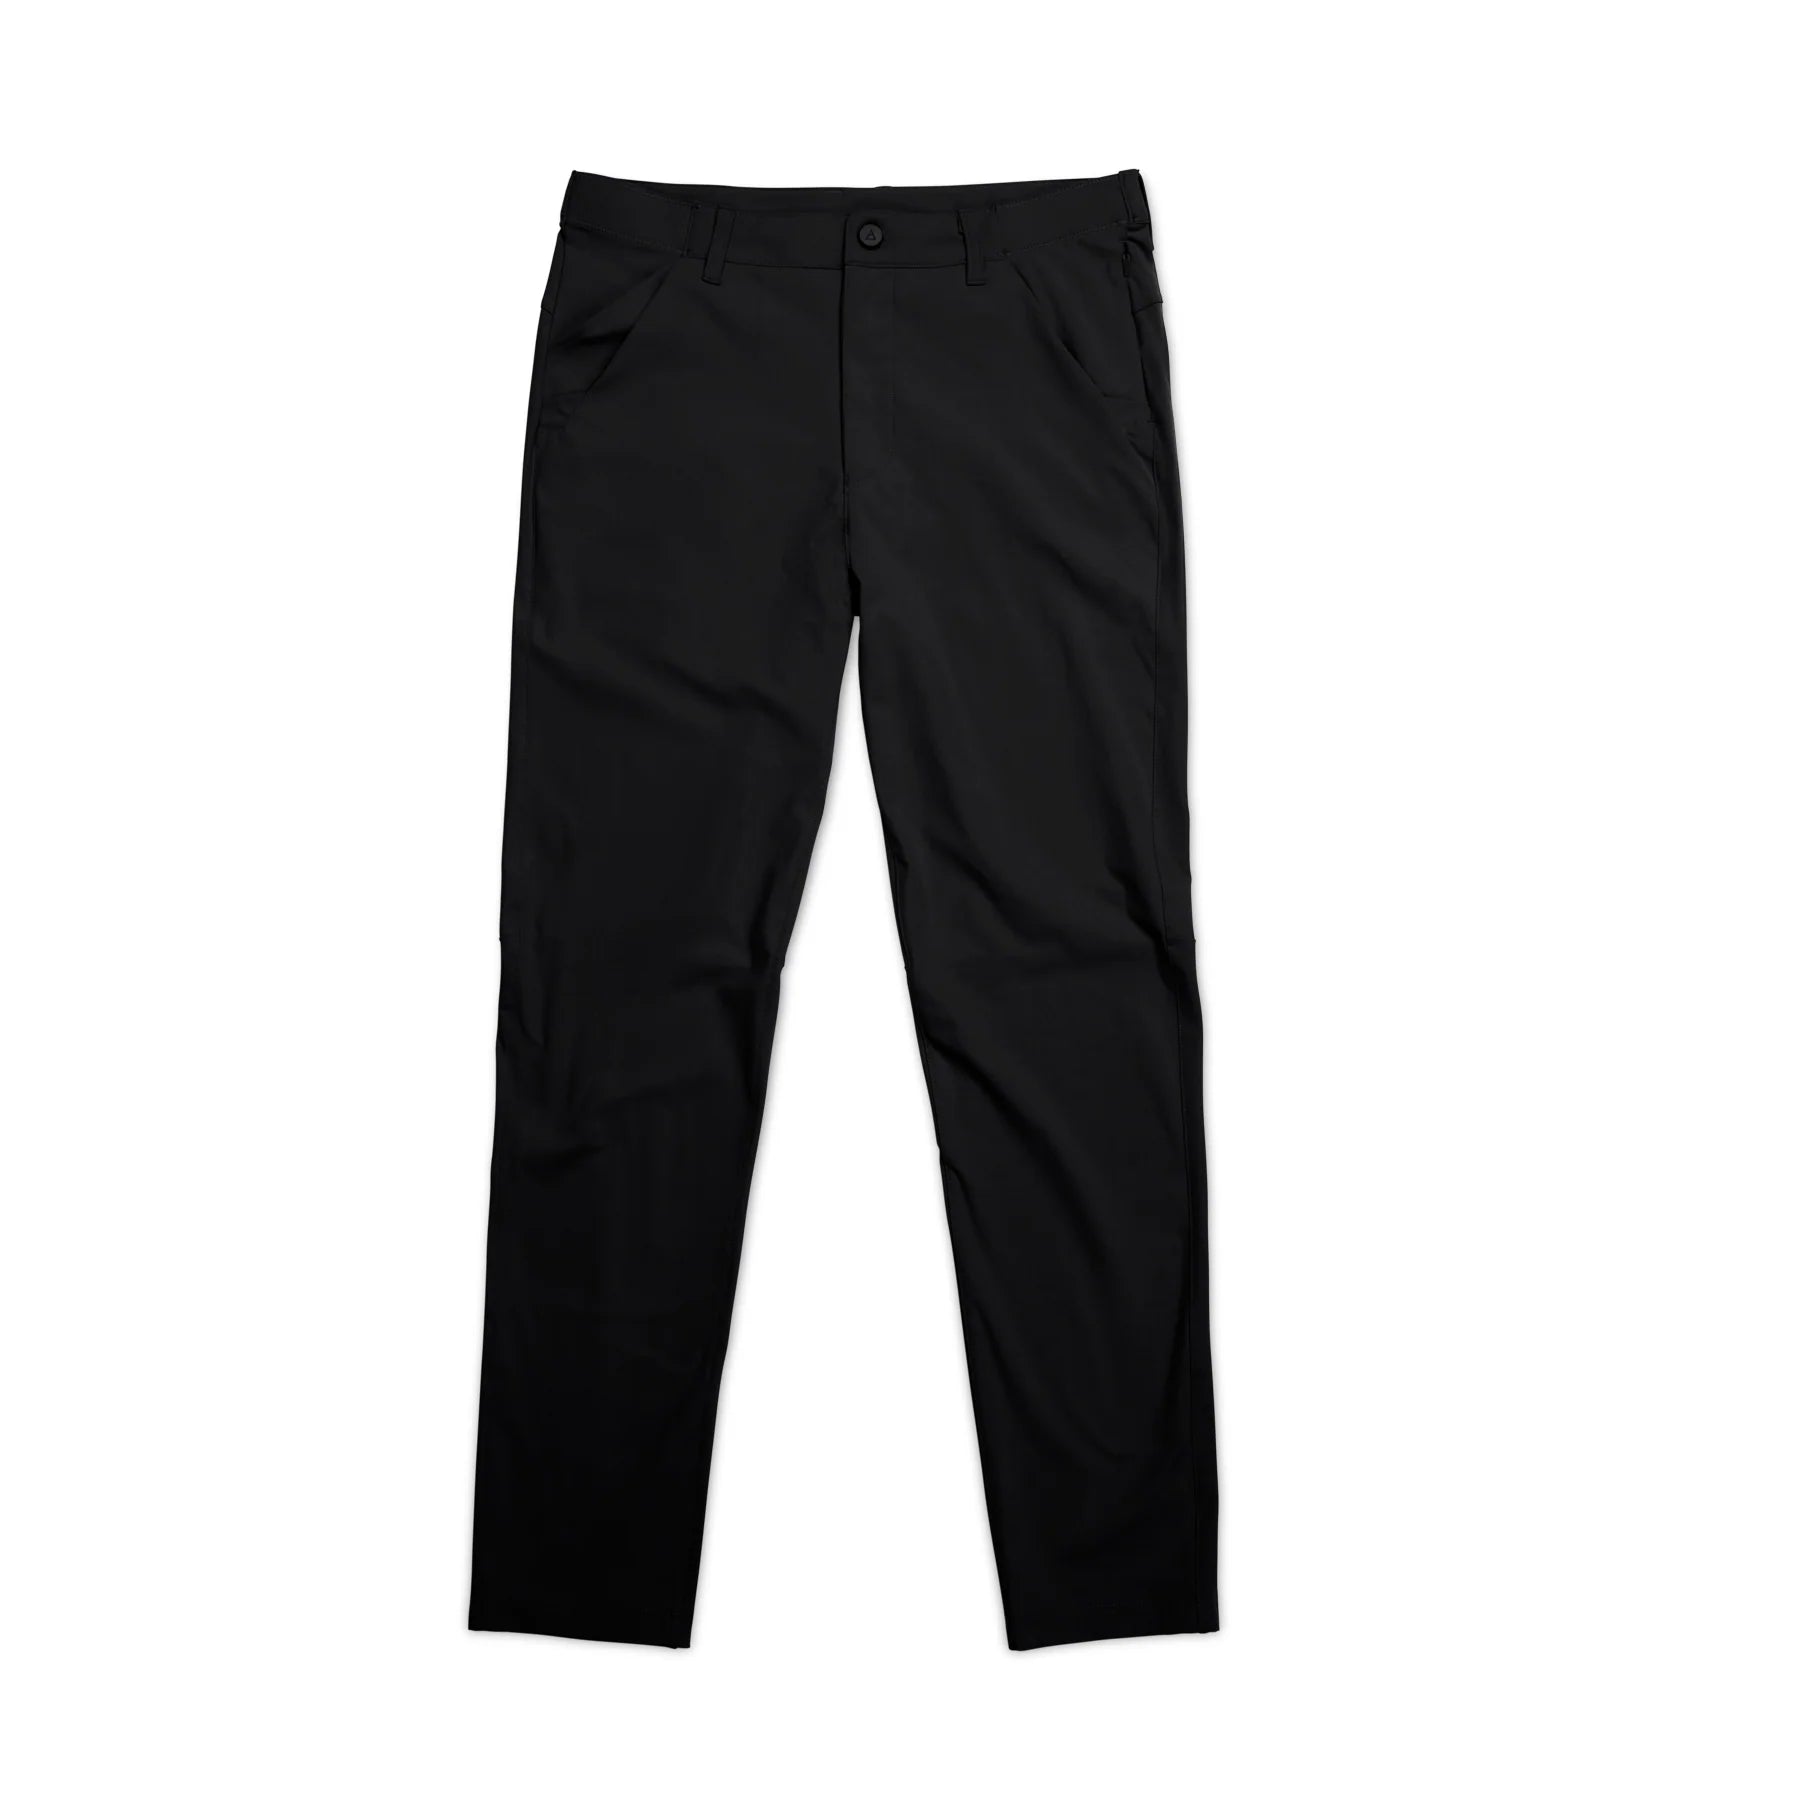 Outset Pants - Meet Your New Go-To Pants – NOMATIC